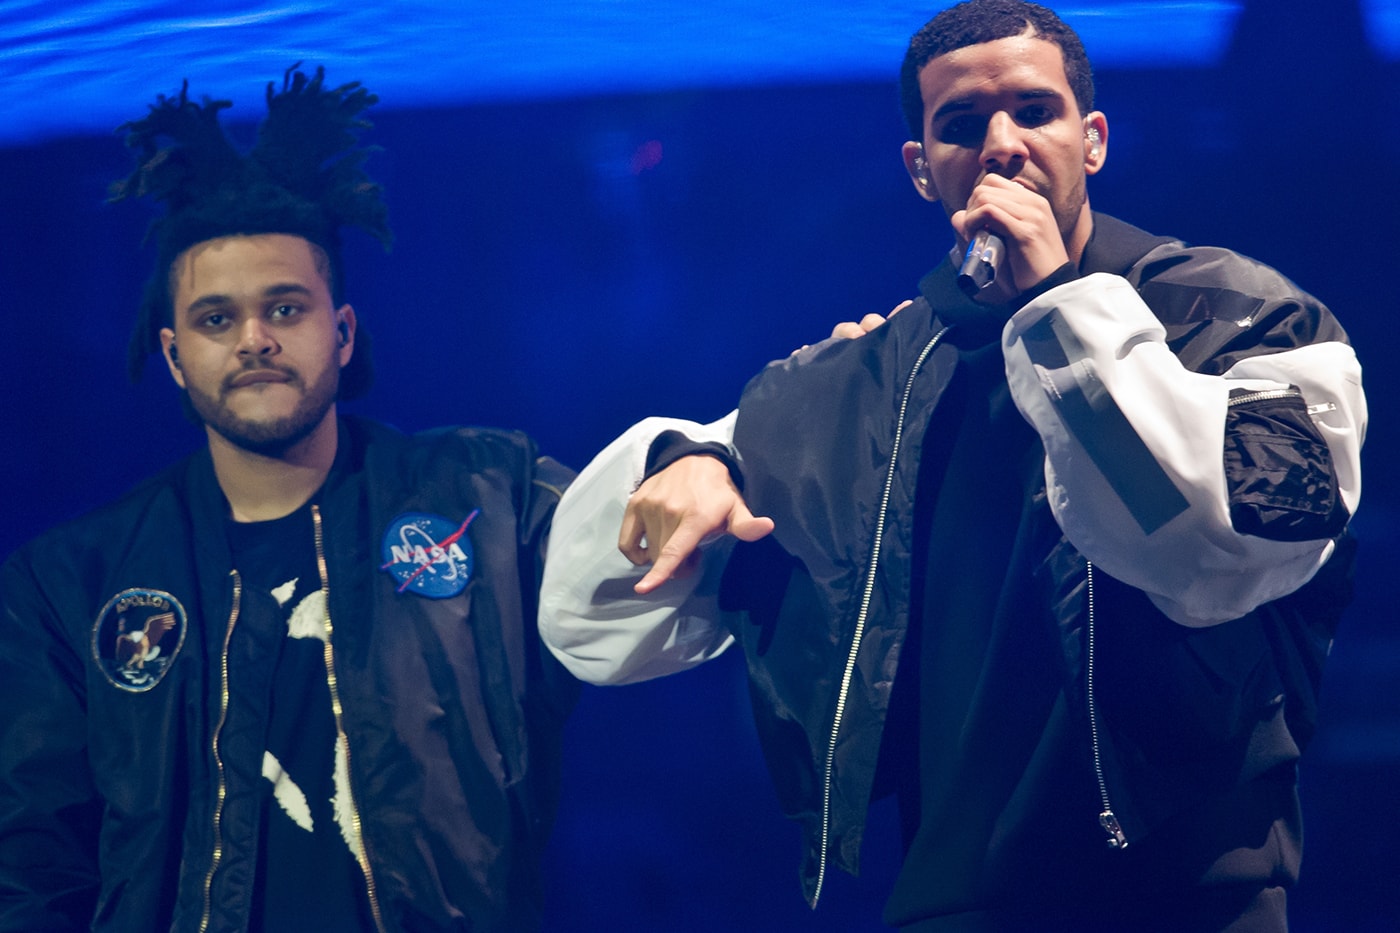 The Weeknd Responds to Grammys Snub on Twitter